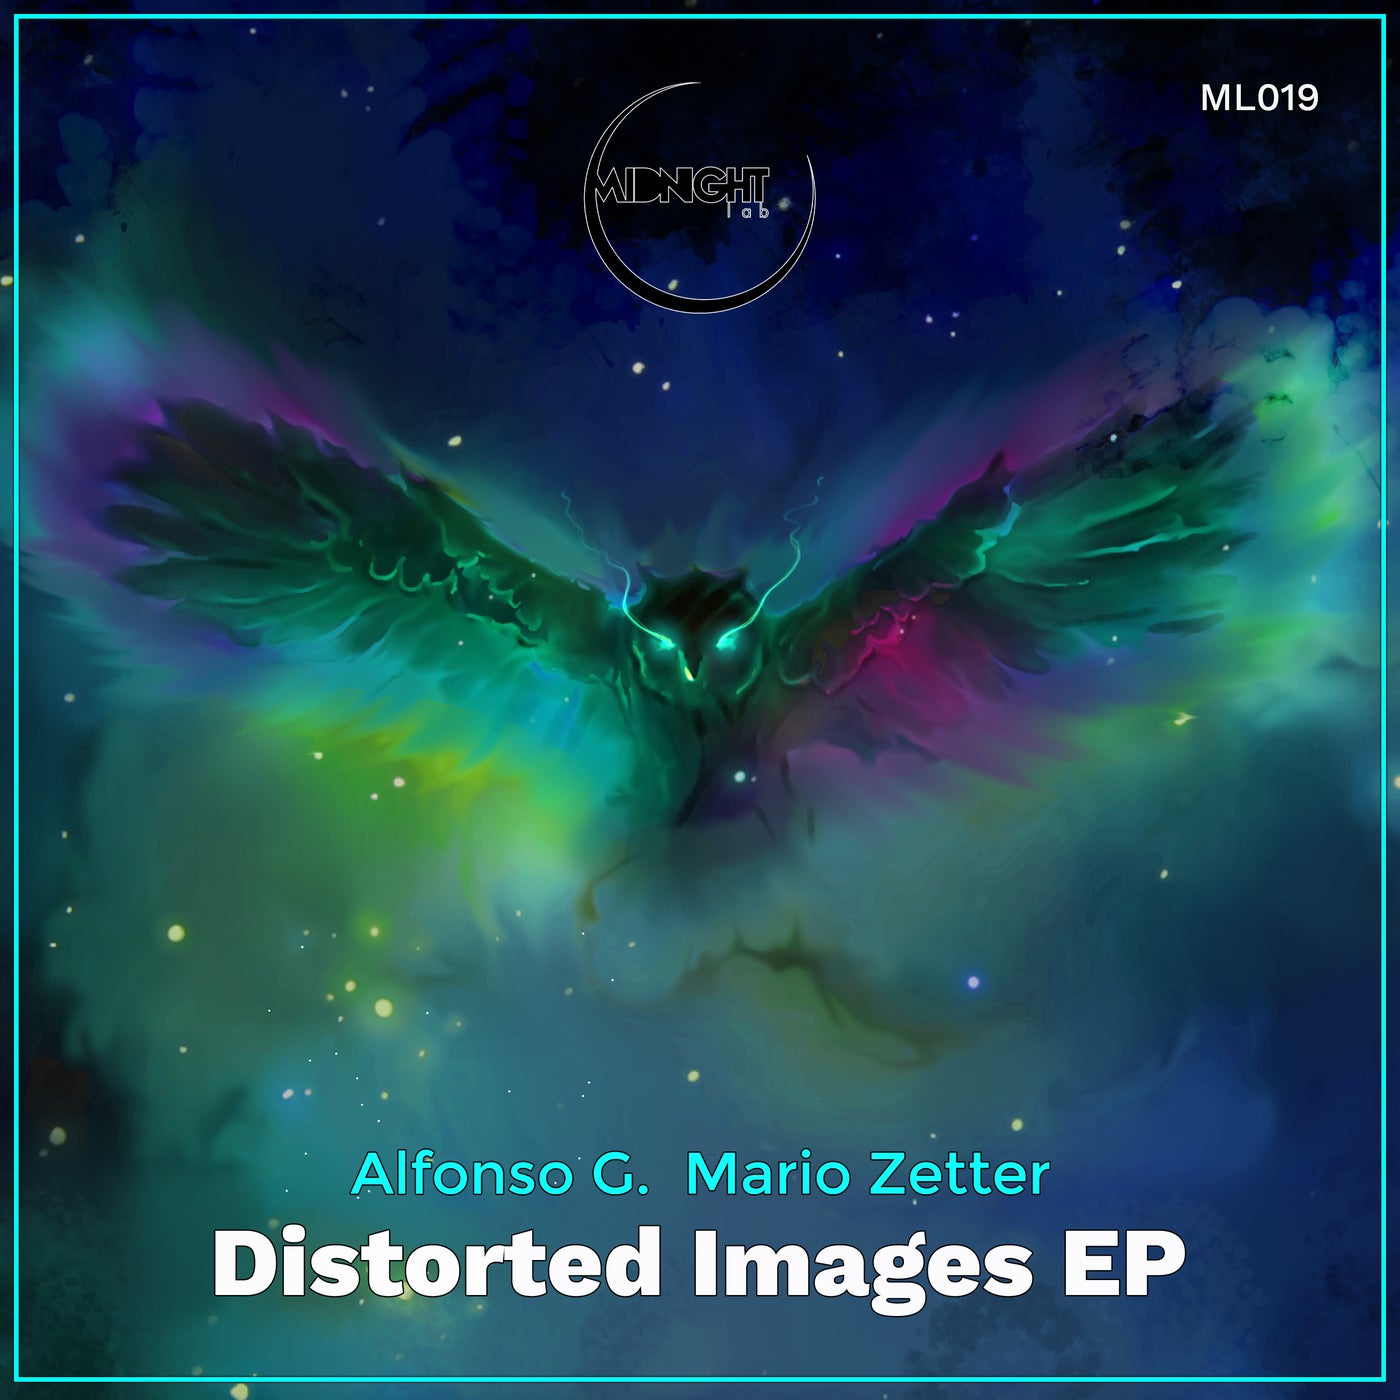 Alfonso G, Mario Zetter - Distorted Images EP [ML019]